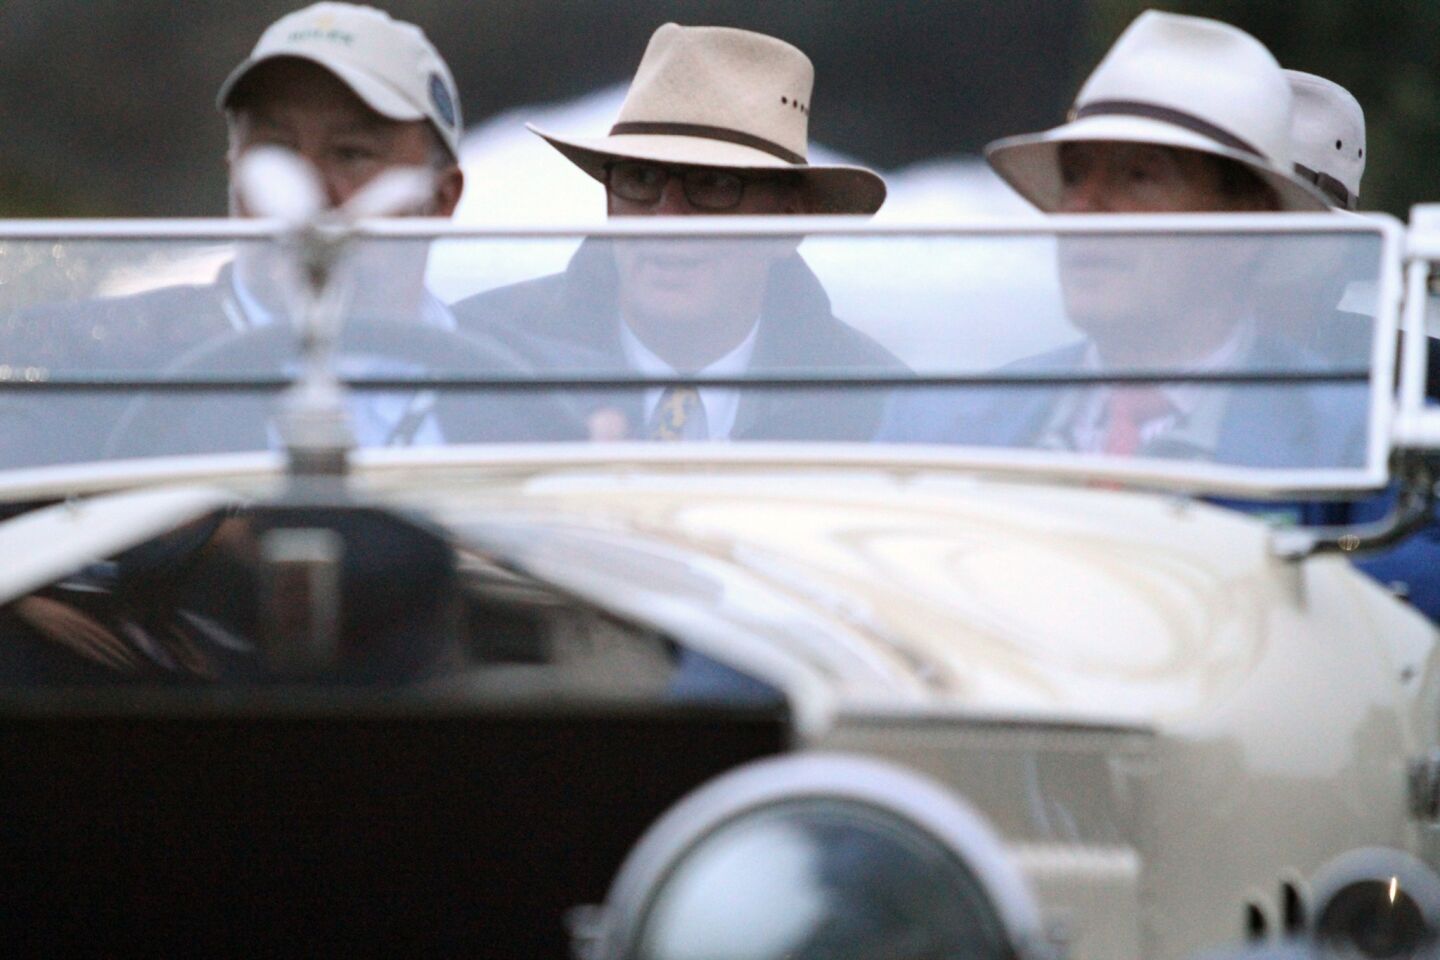 Wearing a variety of hats, contestants ride in their Rolls Royce.